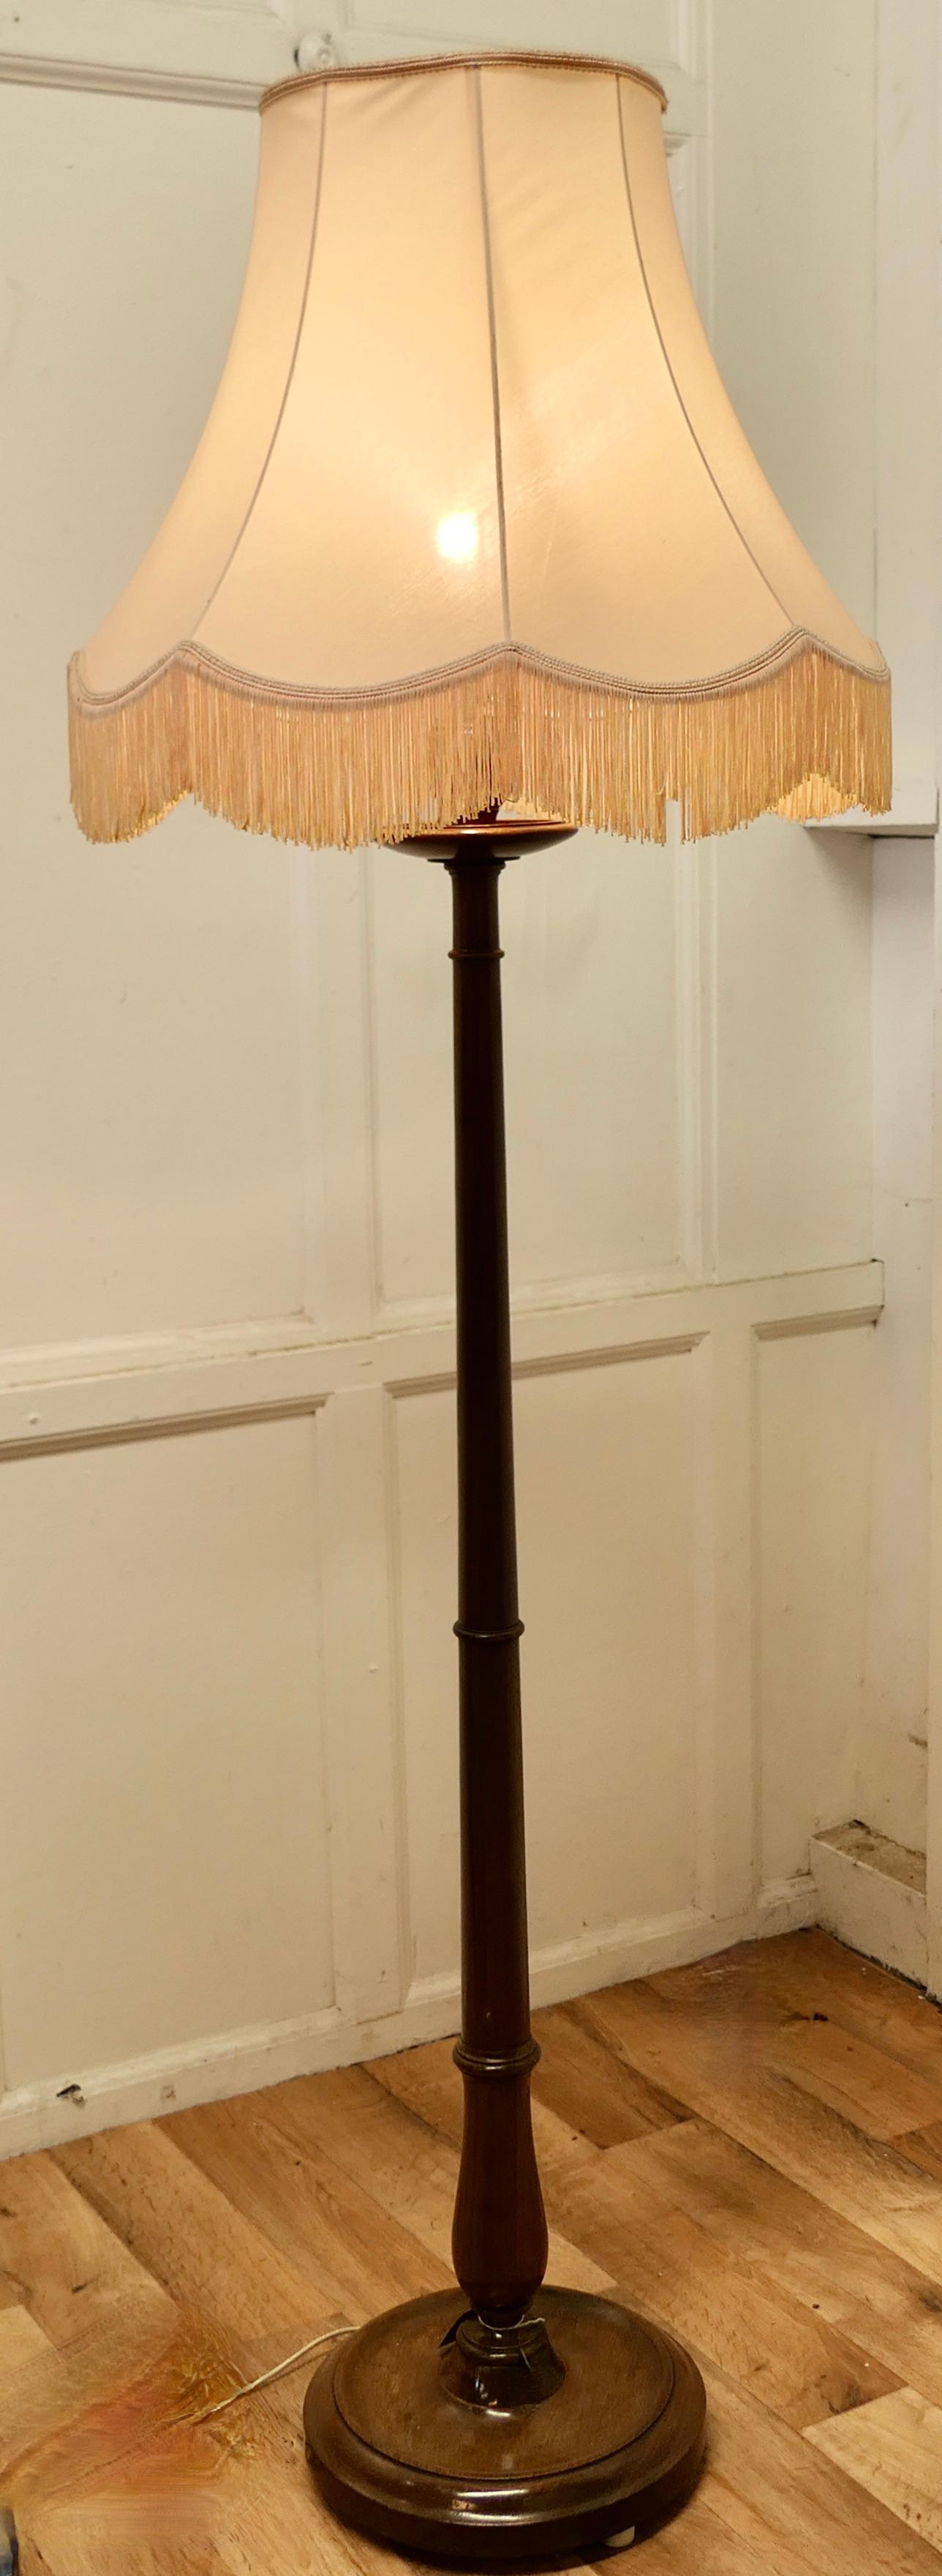 Art Deco walnut floor standing or standard lamp

This is an attractive good quality piece in figured walnut, the lamp stands on a beautifully figured walnut base and has a attractively turned upright column
The lamp is in good used and working